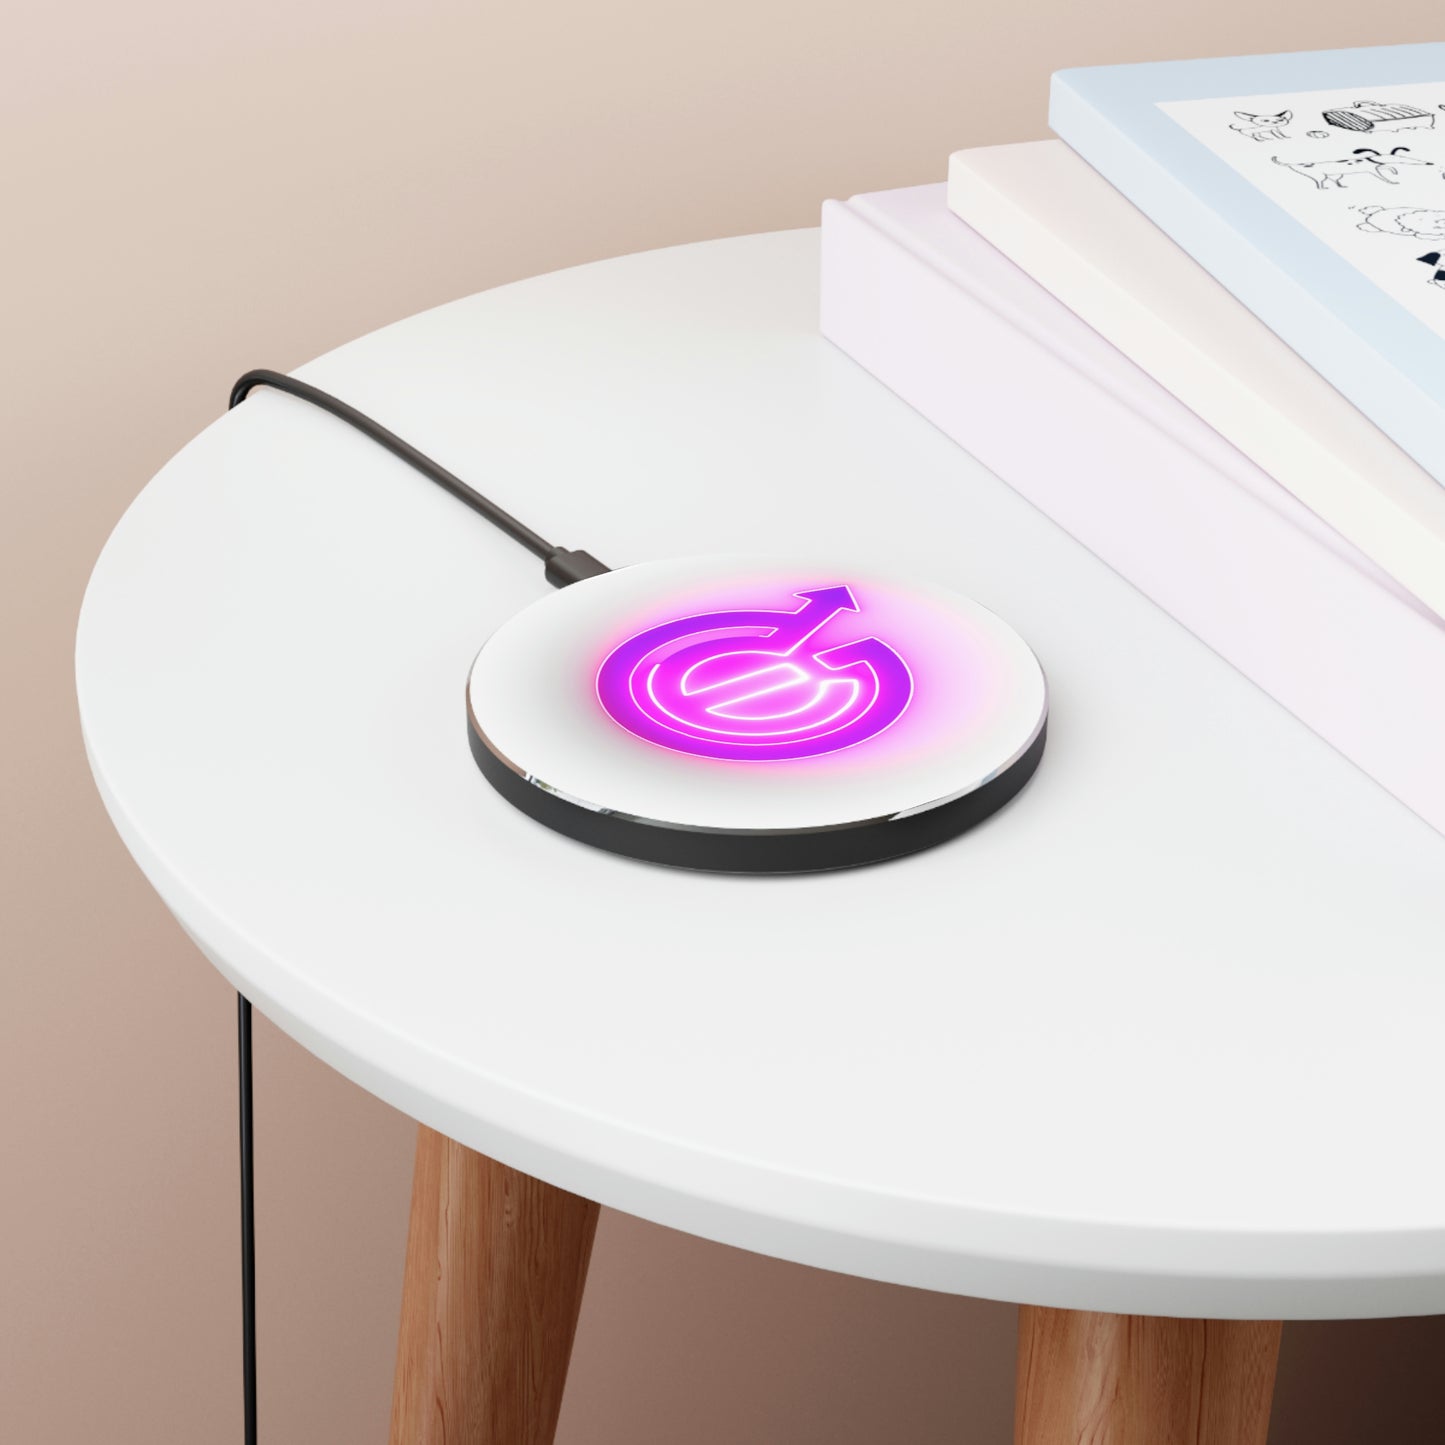 Wireless Charger with EGC Logo